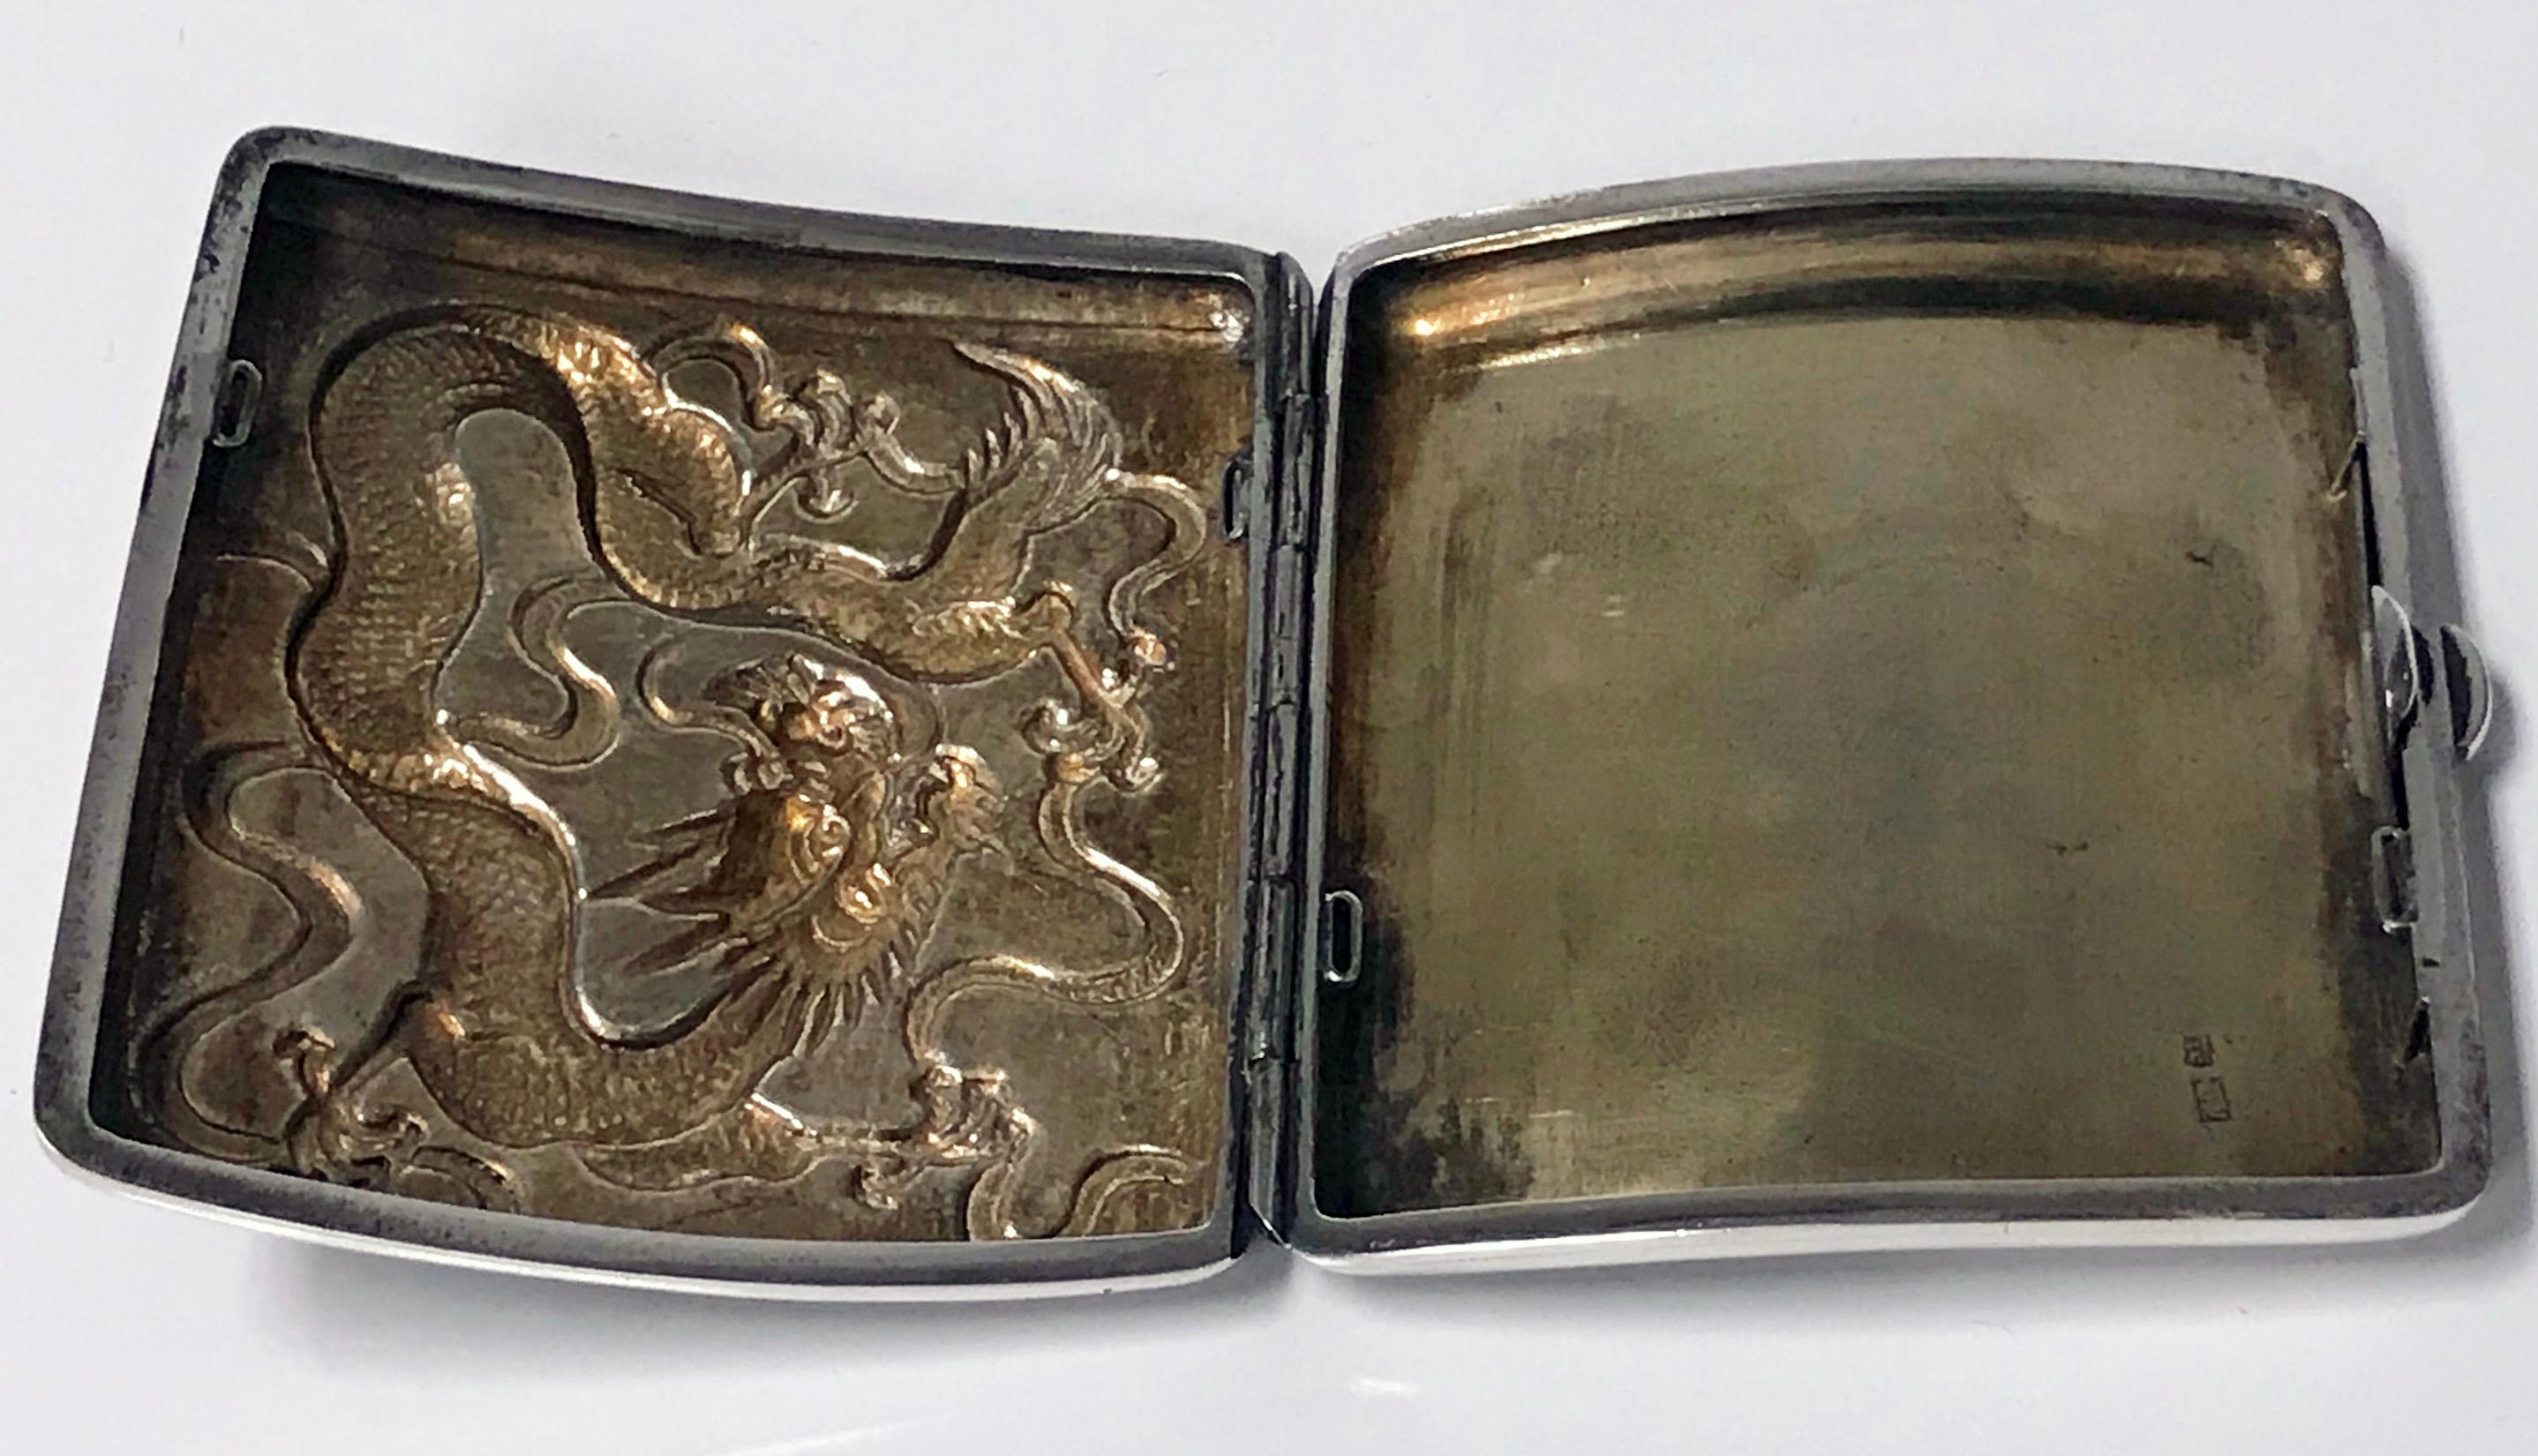 19th Century Antique Chinese Export Silver Cigarette Case, TC for Tuck Chang, circa 1900